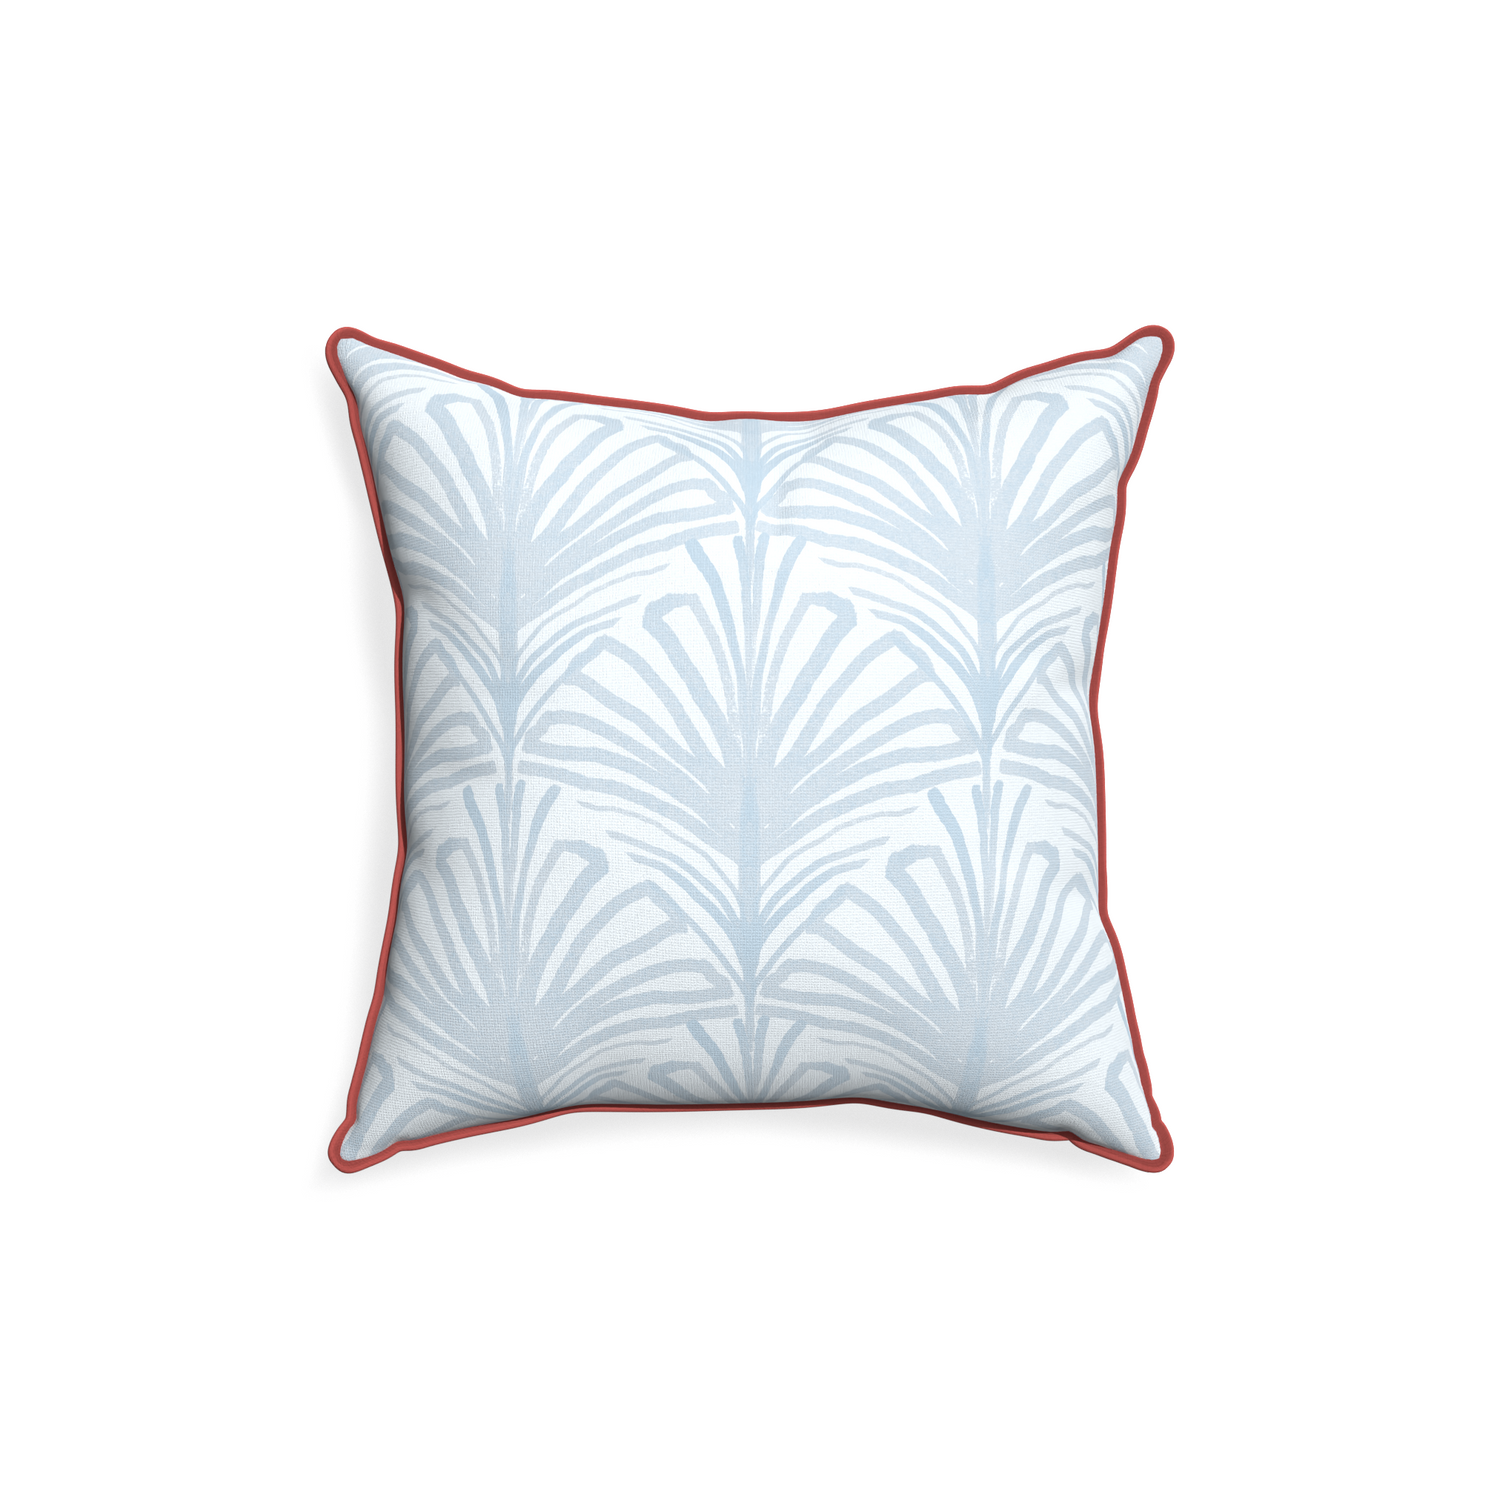 18-square suzy sky custom pillow with c piping on white background